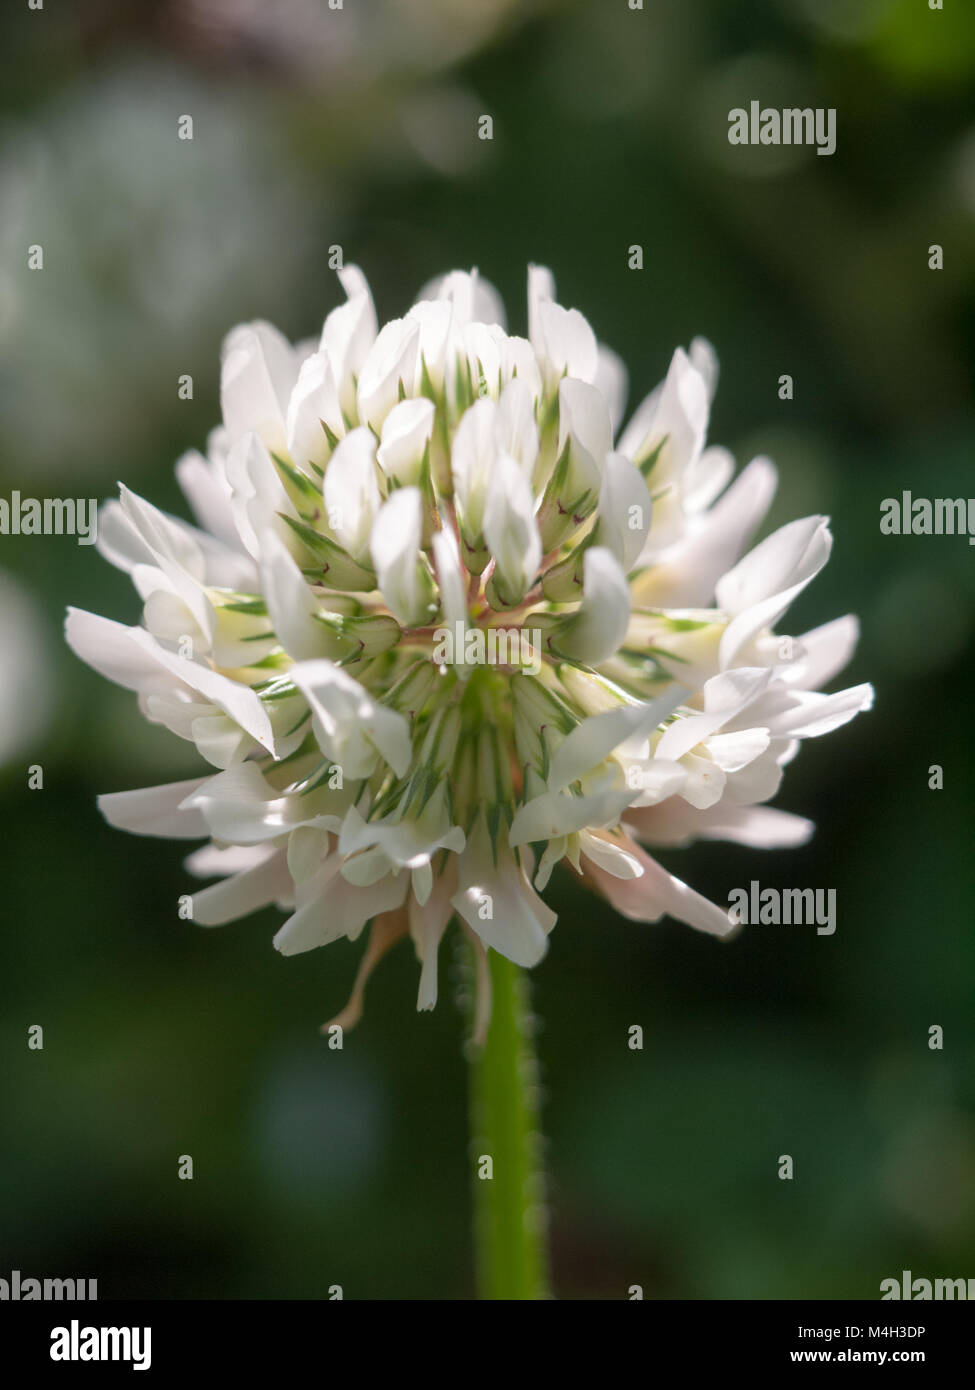 clover flower head up close outside Stock Photo